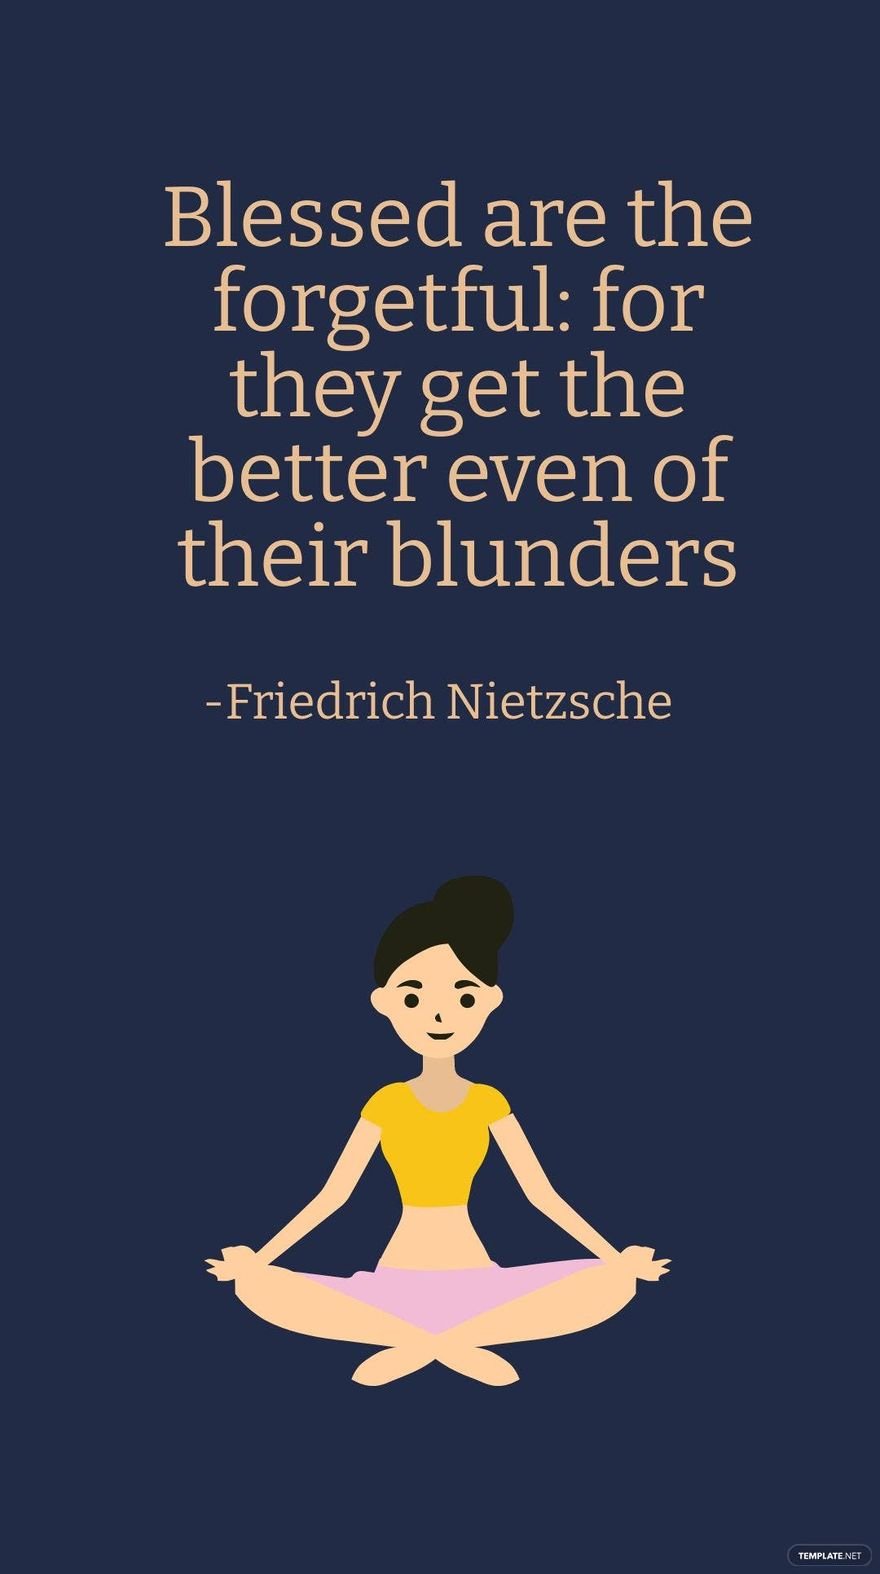 Free Friedrich Nietzsche - Blessed are the forgetful: for they get the better even of their blunders in JPG